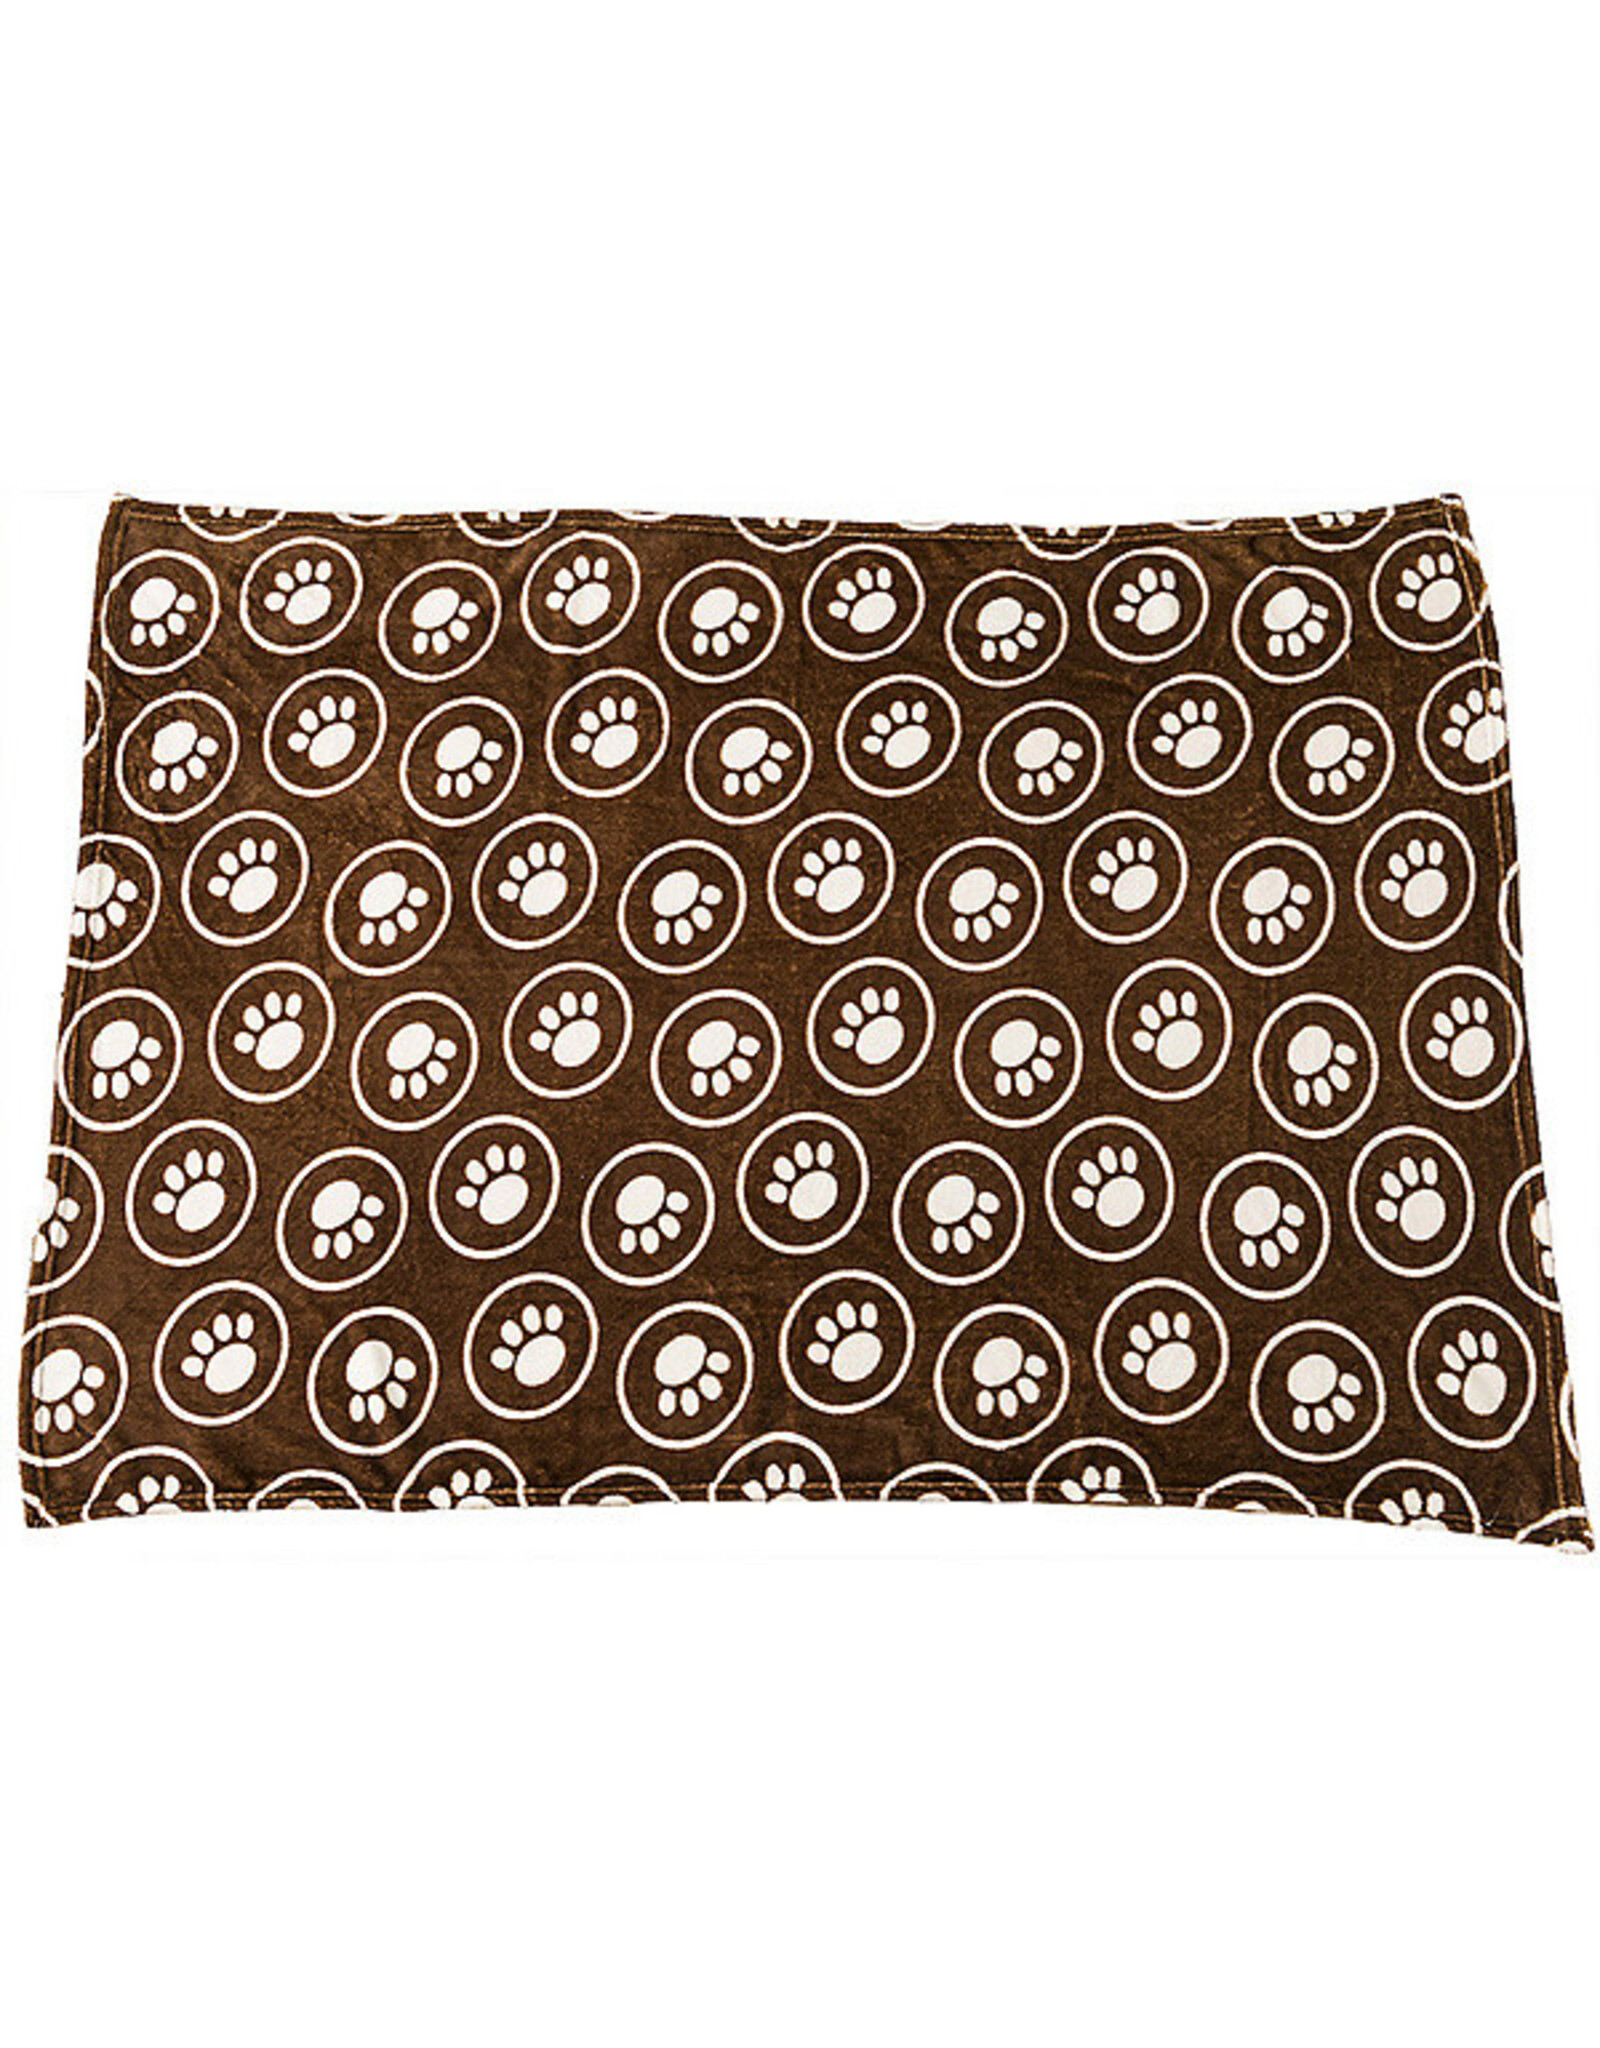 Ethical Snuggler Blanket Paws & Circles Chocolate 30" x 40"